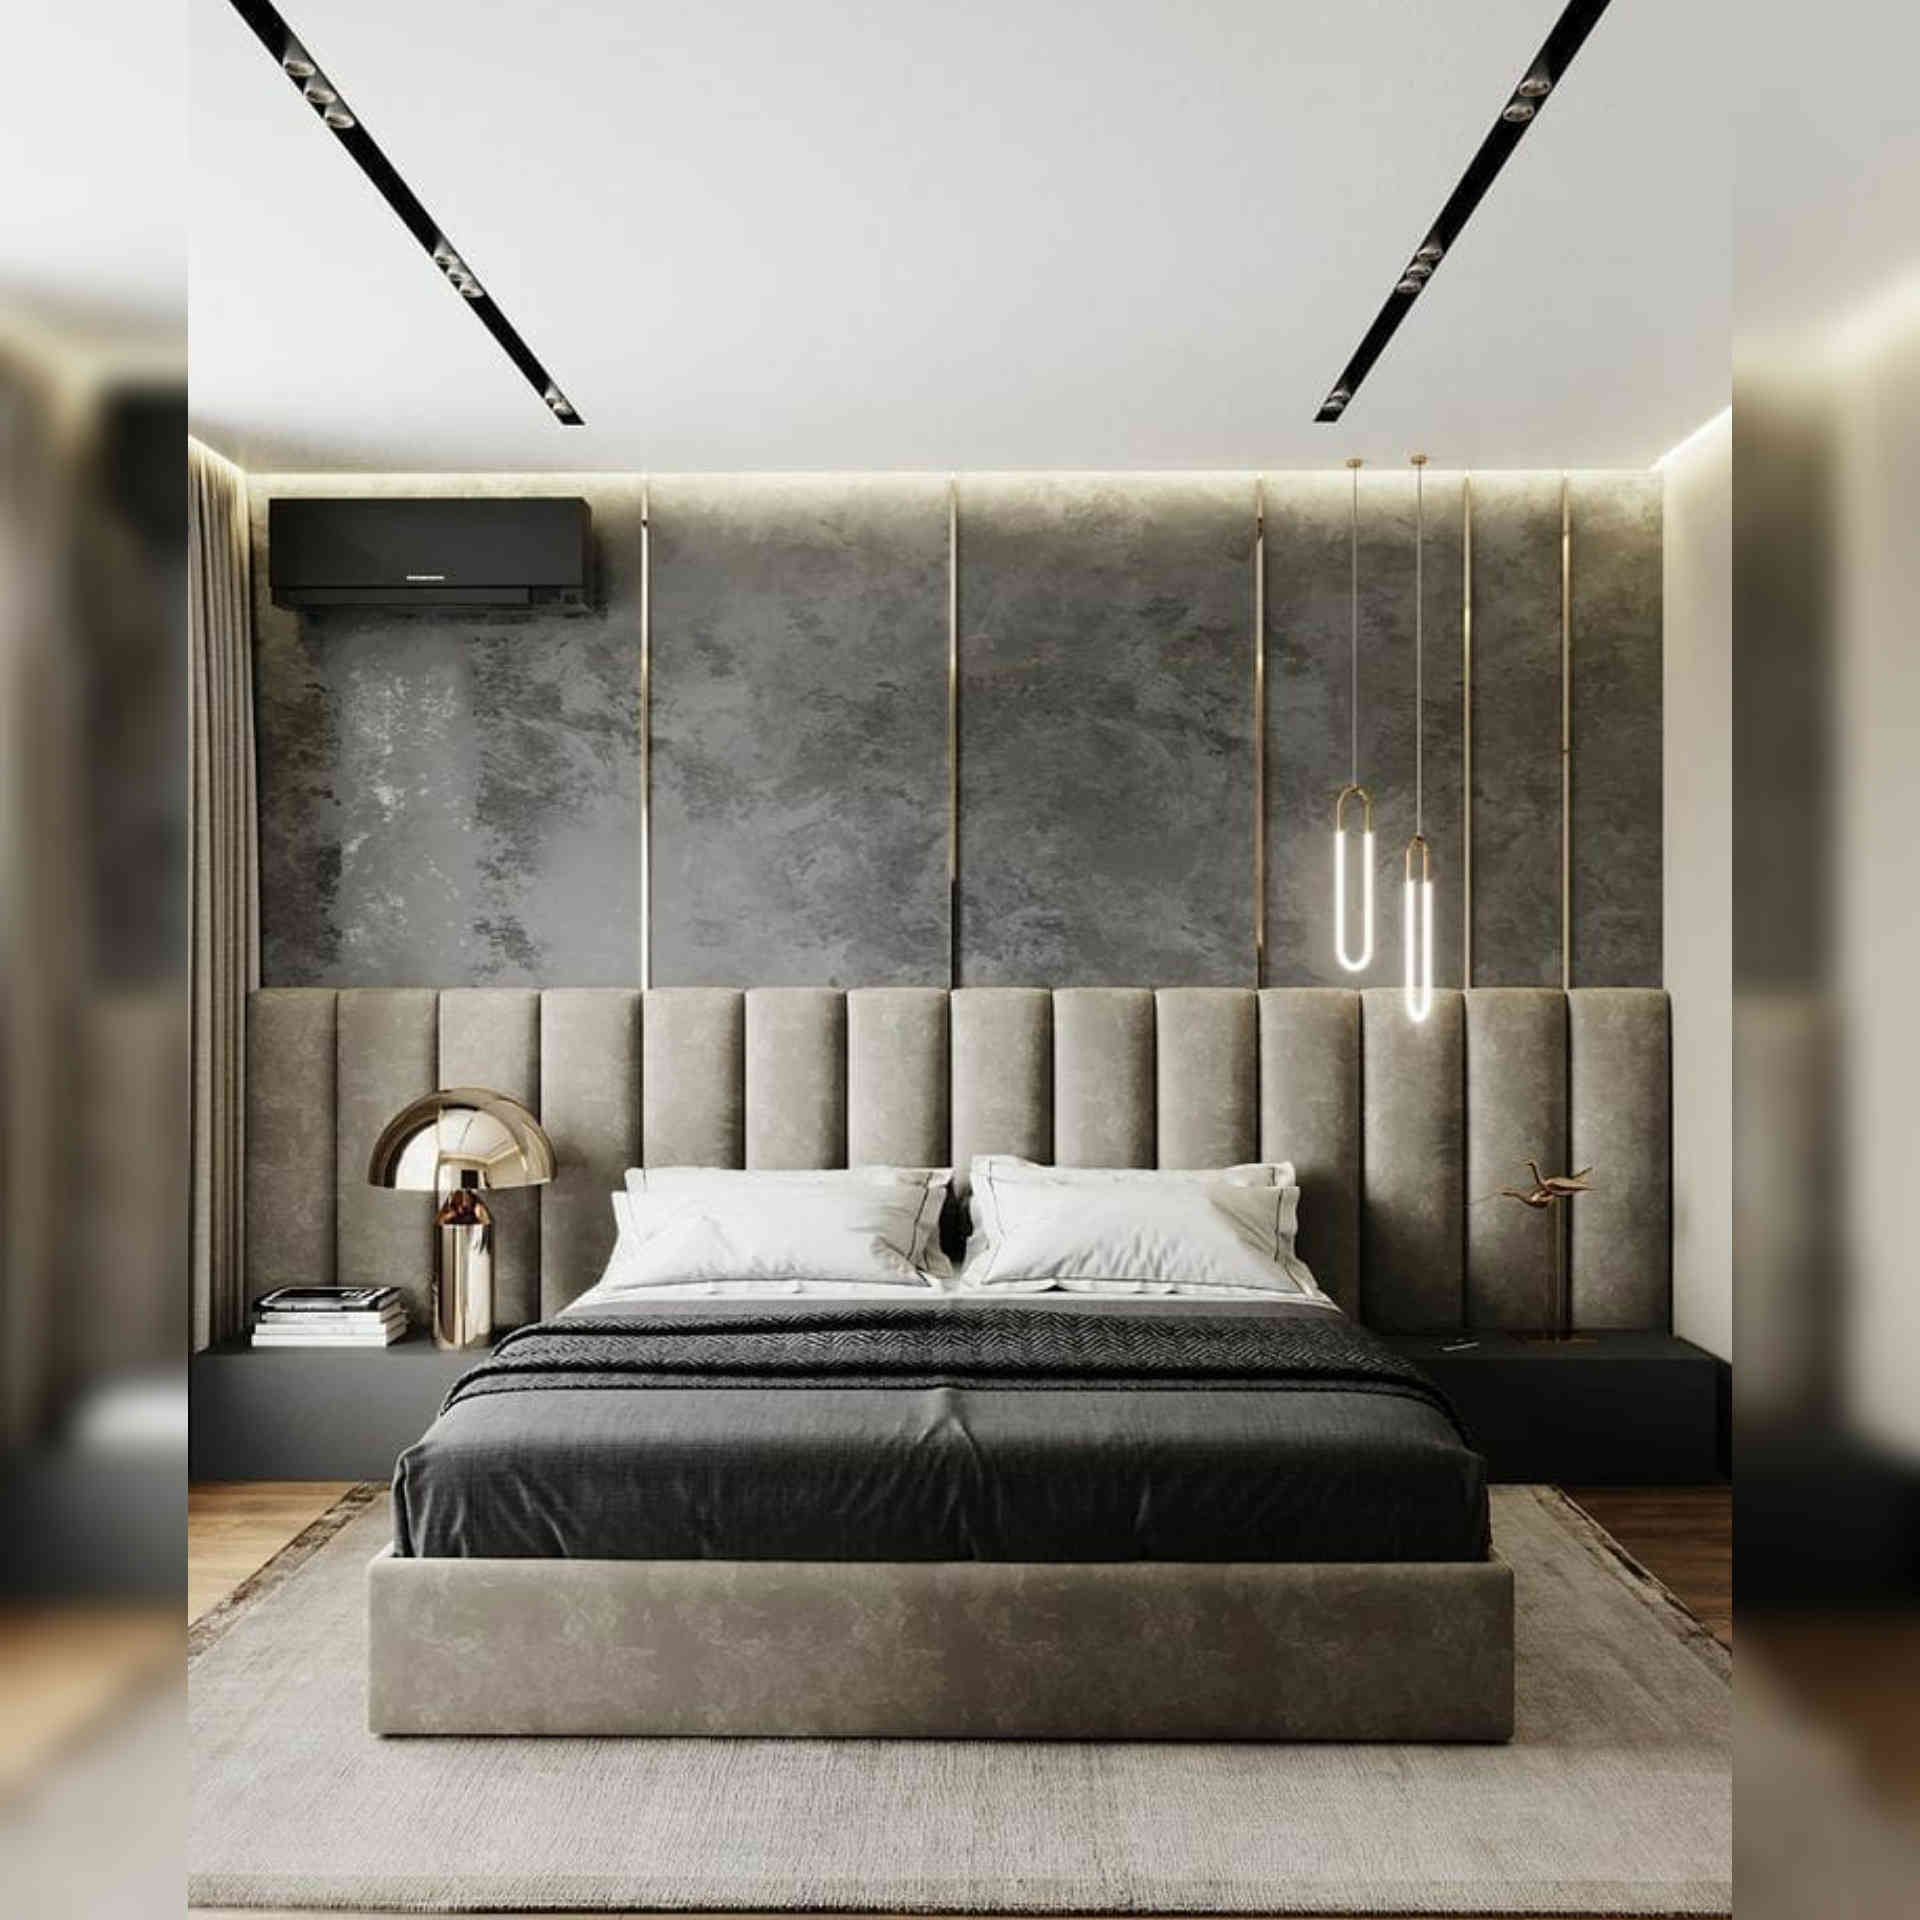 Contemporary Master Bedroom Design With Black Accent Wall And Trims